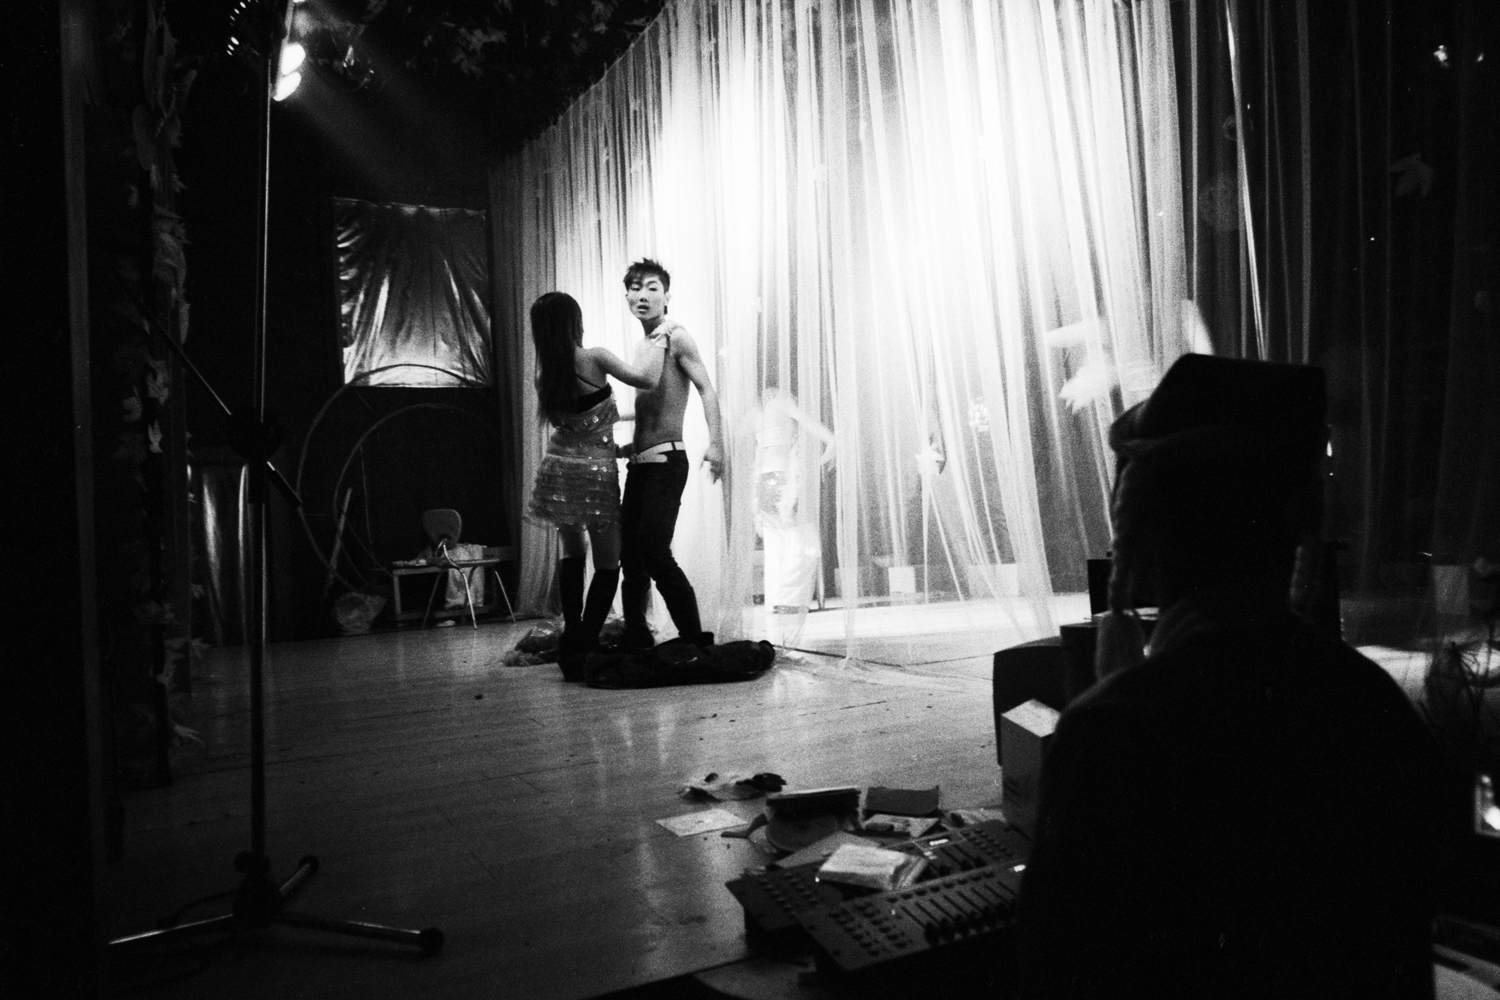 Backstage at the Night Cat gay bar and cabaret. 2007.